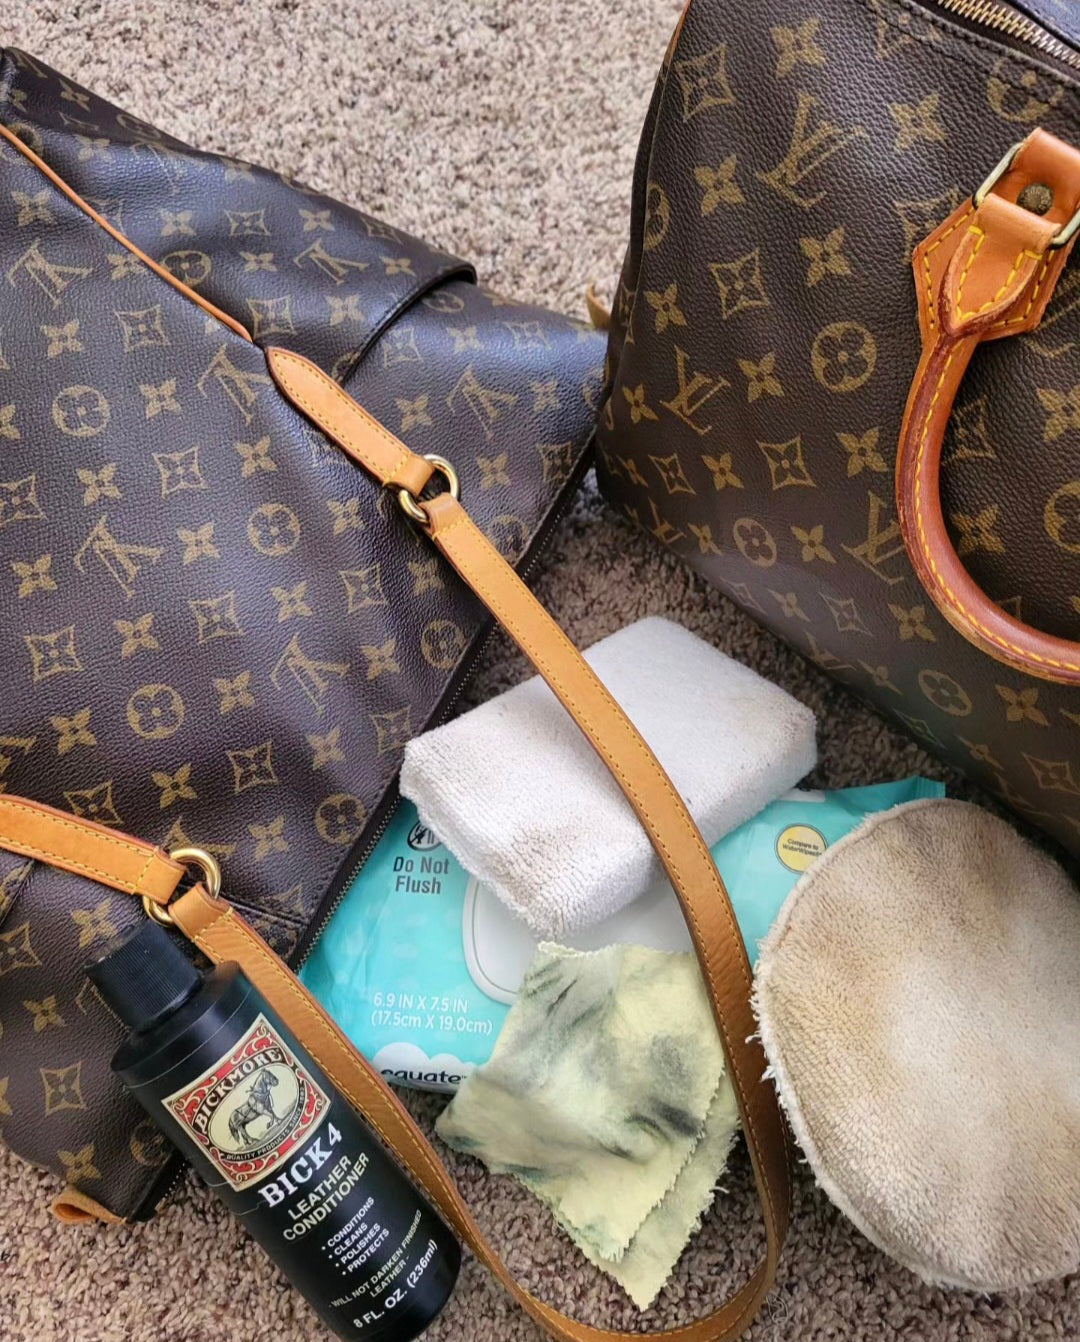 3 Simple Steps To Remove Dirt and Water Stains on Louis Vuitton's